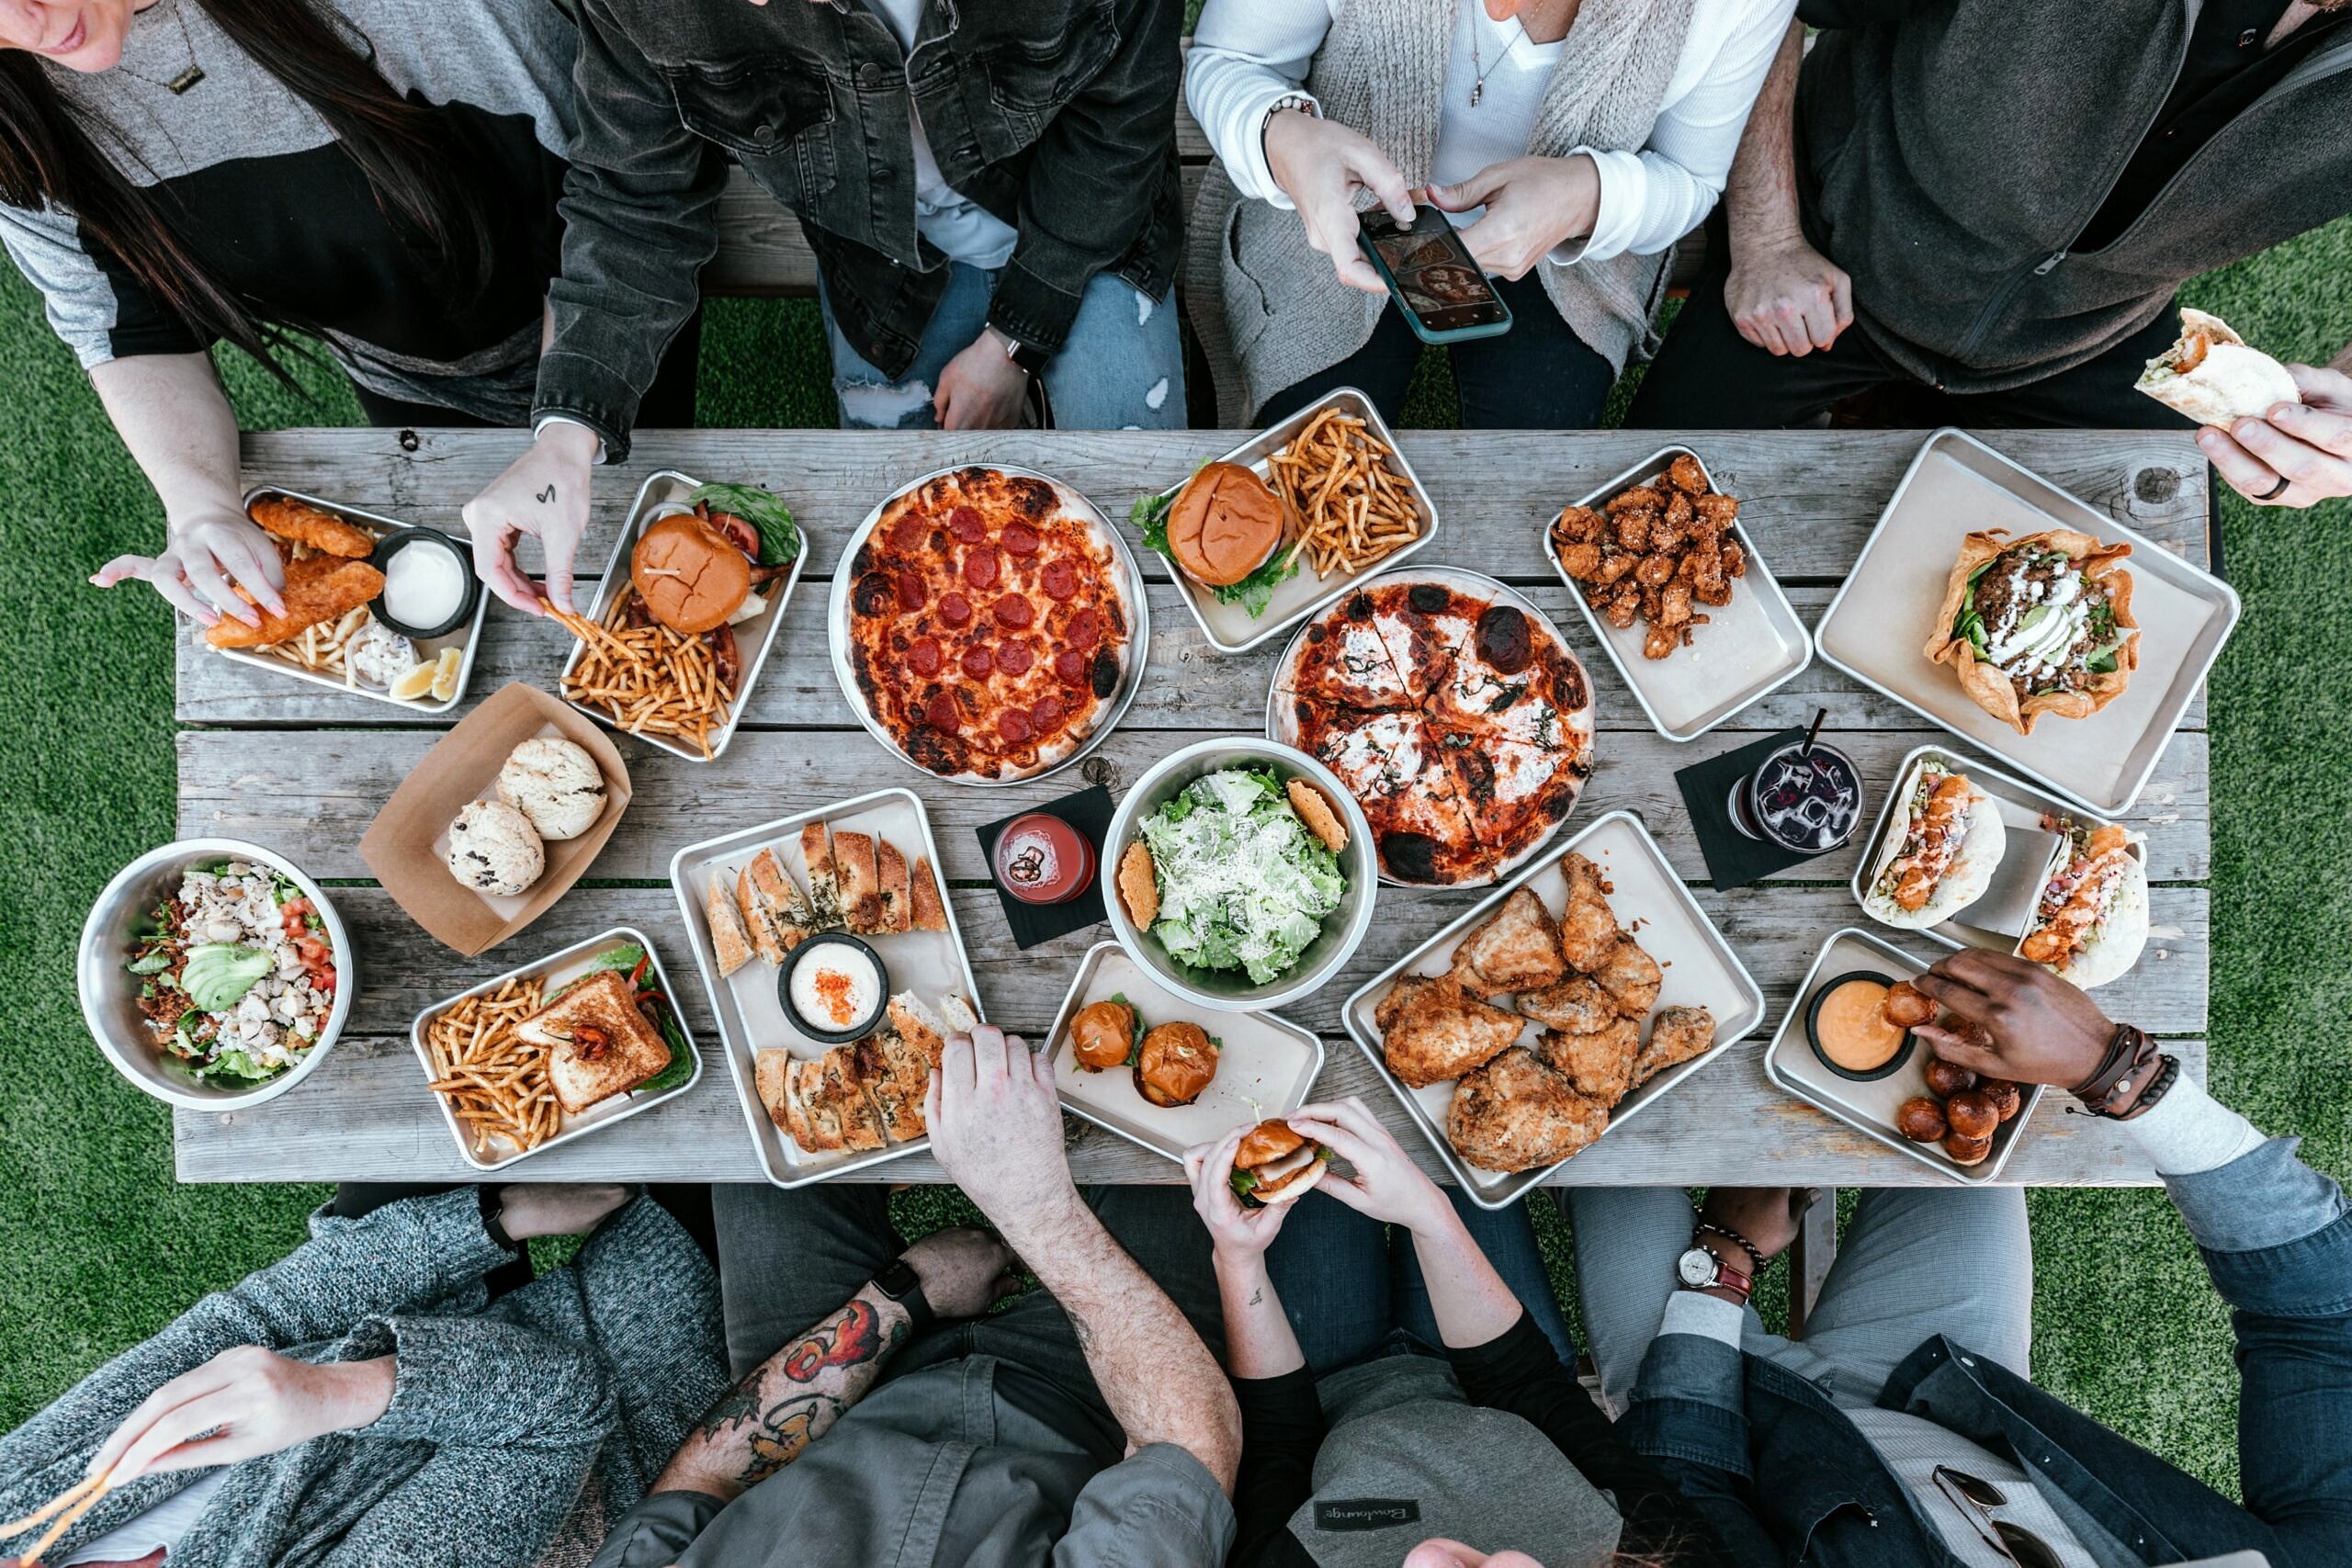 Birds eye view of a group of people eating around a table with food.